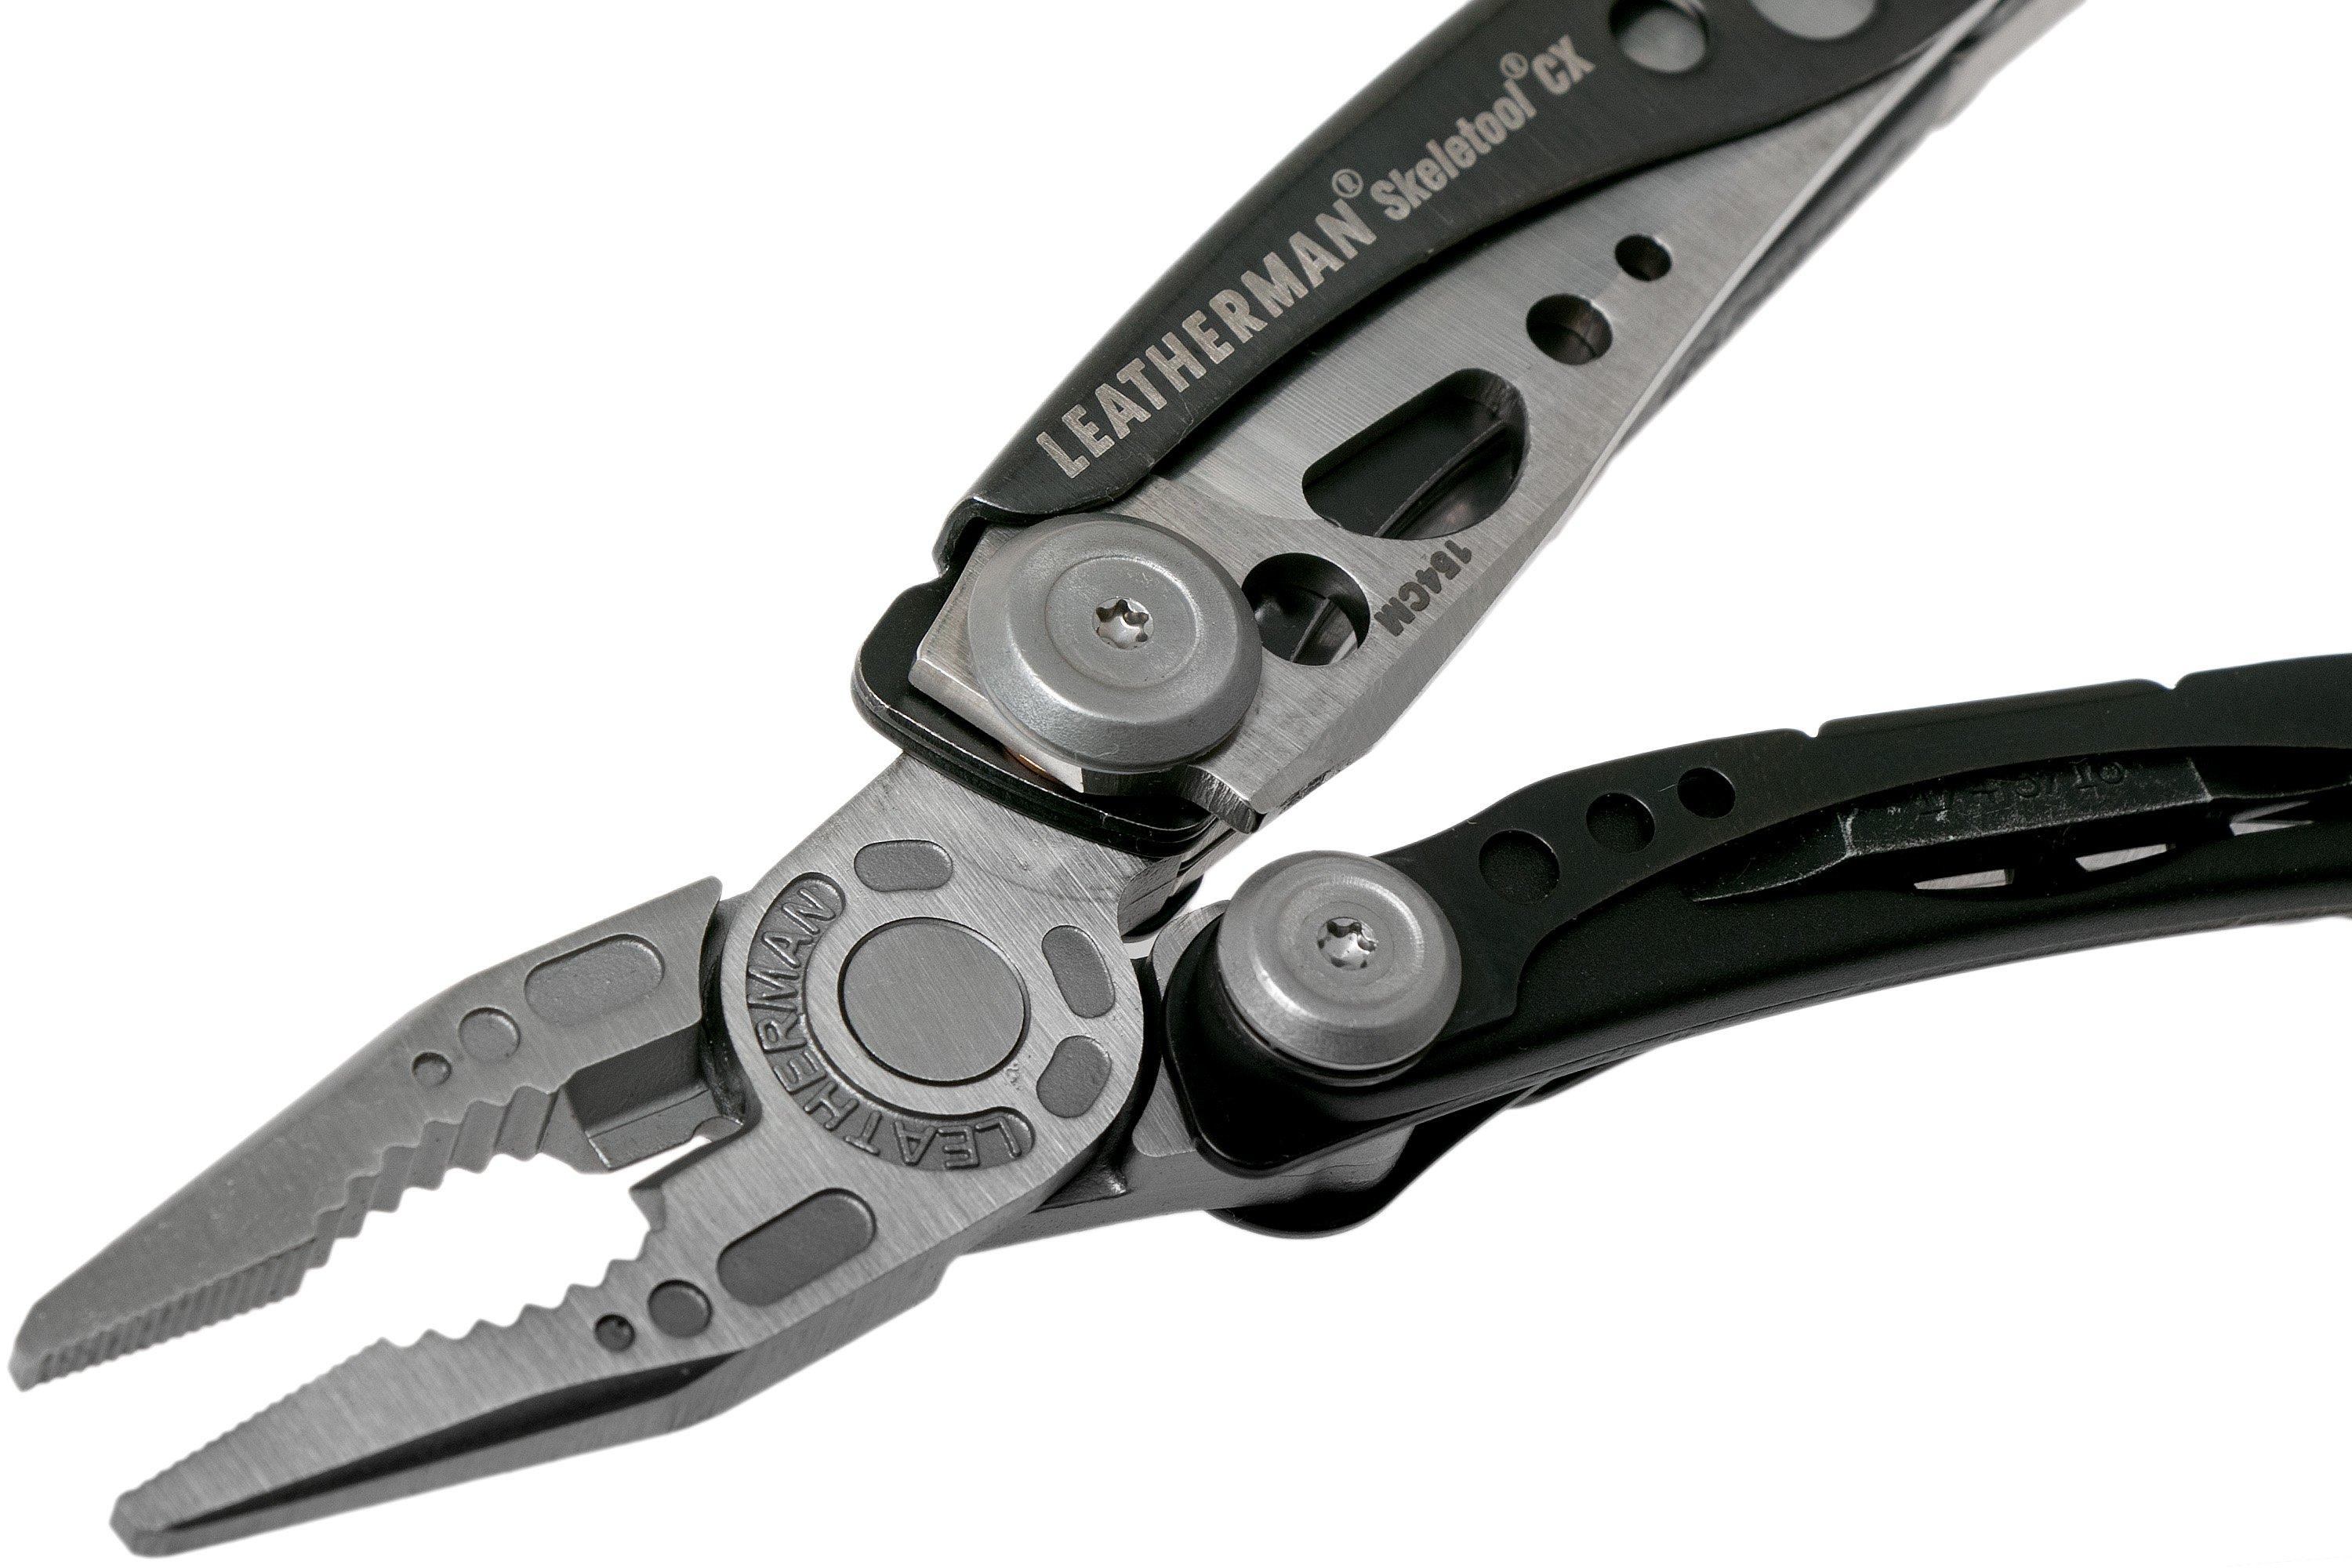 LEATHERMAN SKELETOOL MULTI-TOOL BLACK WITH TOPO BLADE **EXCELLENT CONDITION**